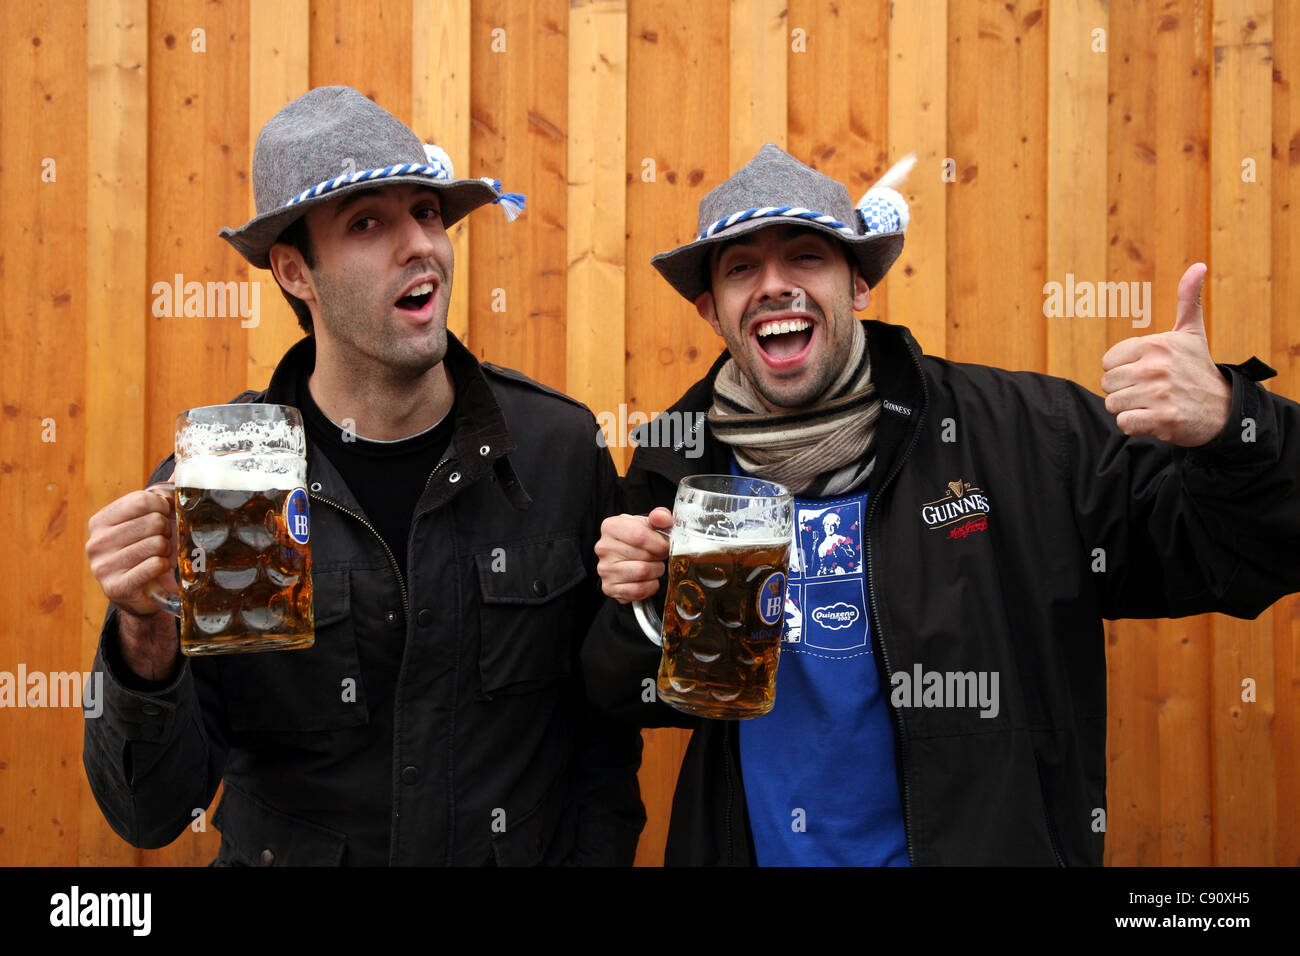 Happy visitors with traditional one litre beer masses at the Oktoberfest Beer Festival in Munich, Germany. Stock Photo